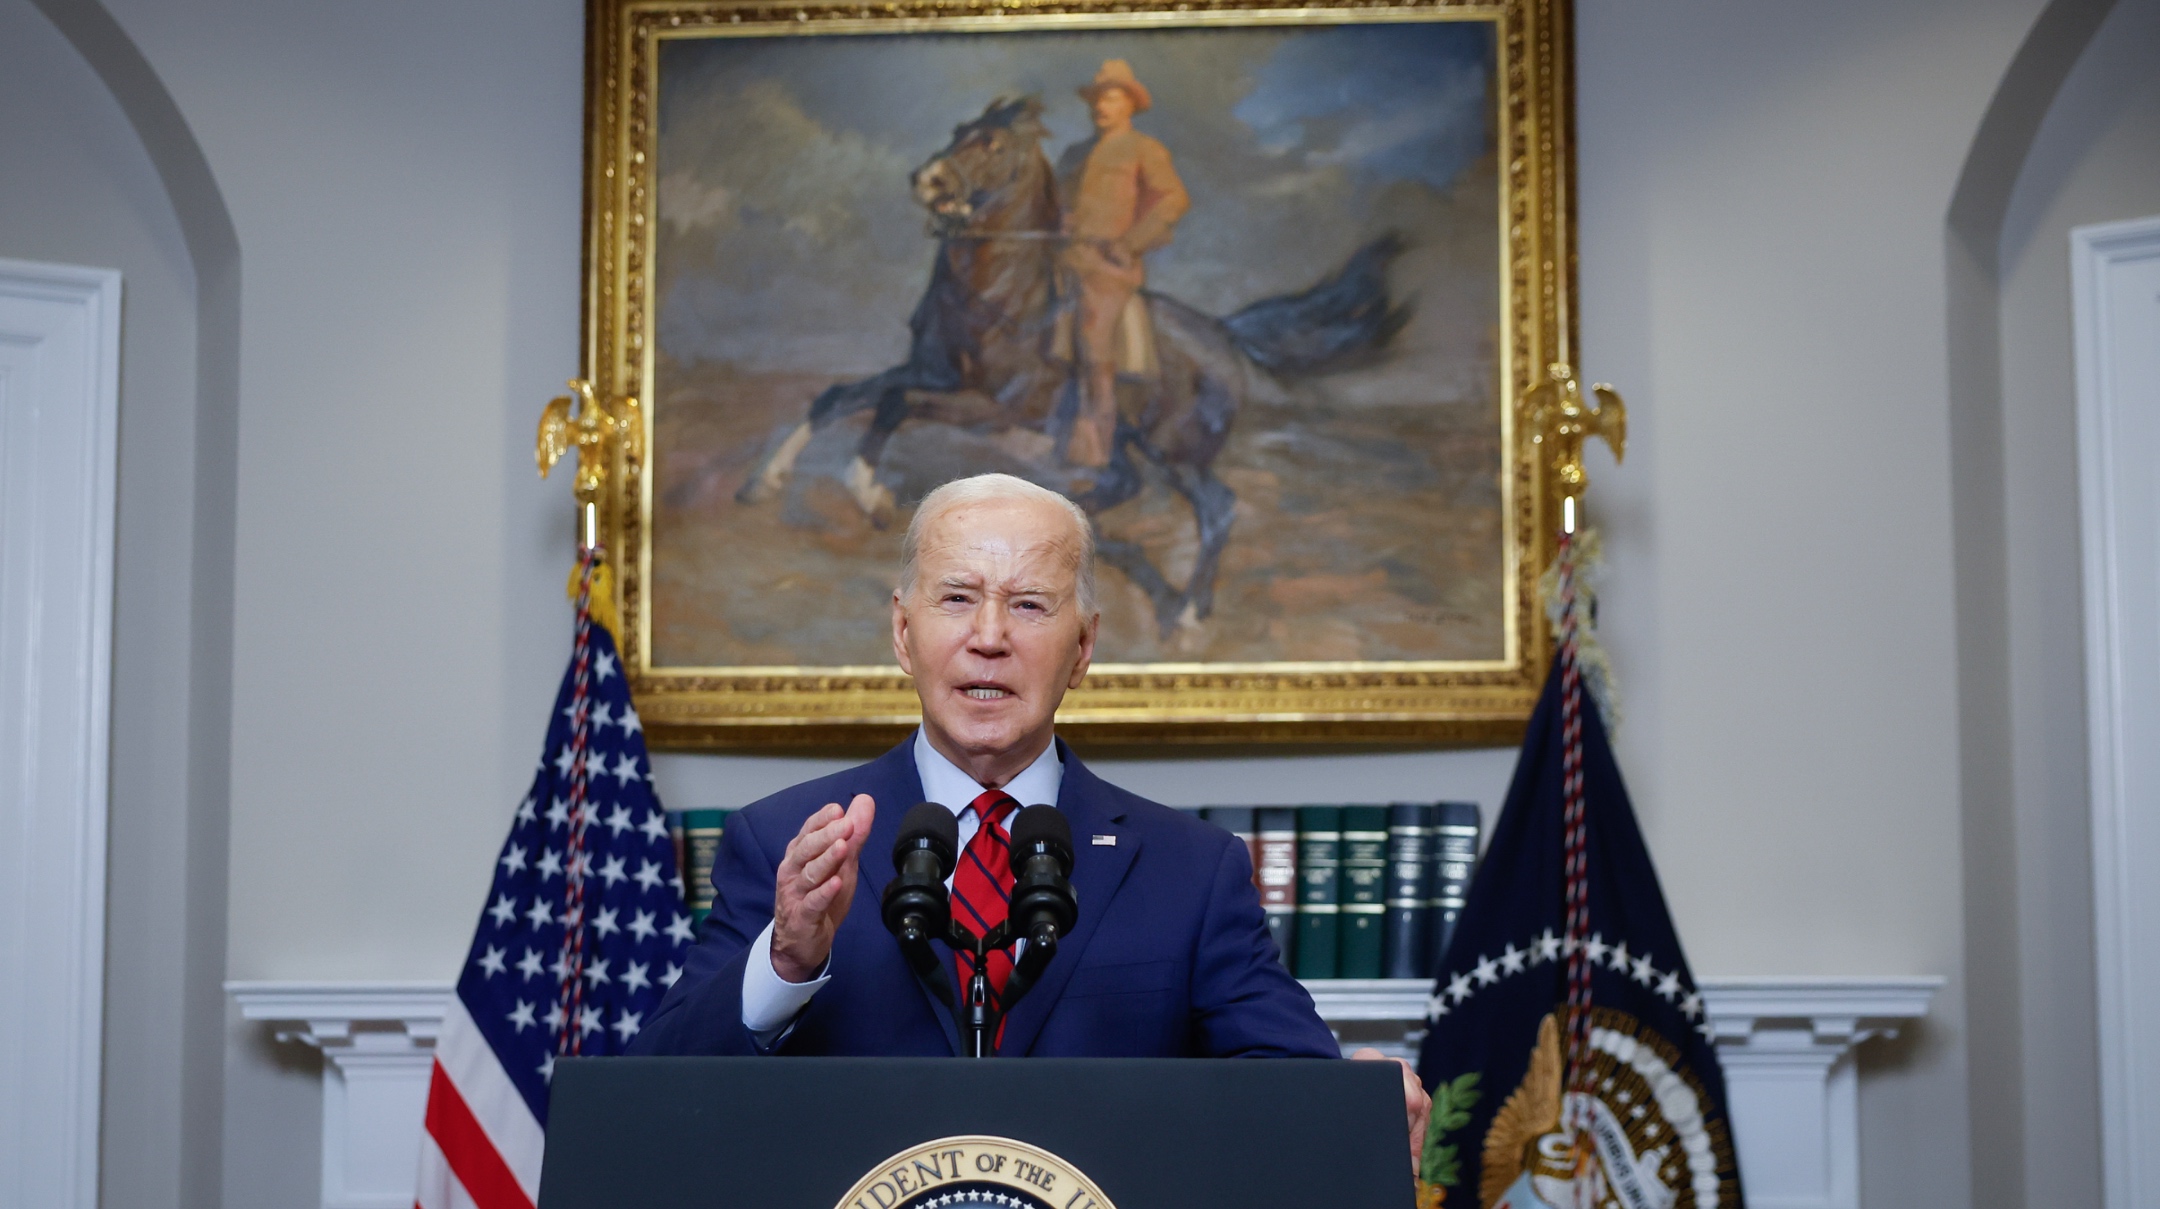 Biden on campus pro-Palestinian protests: ‘Dissent must never lead to disorder,’ but don’t call federal troops